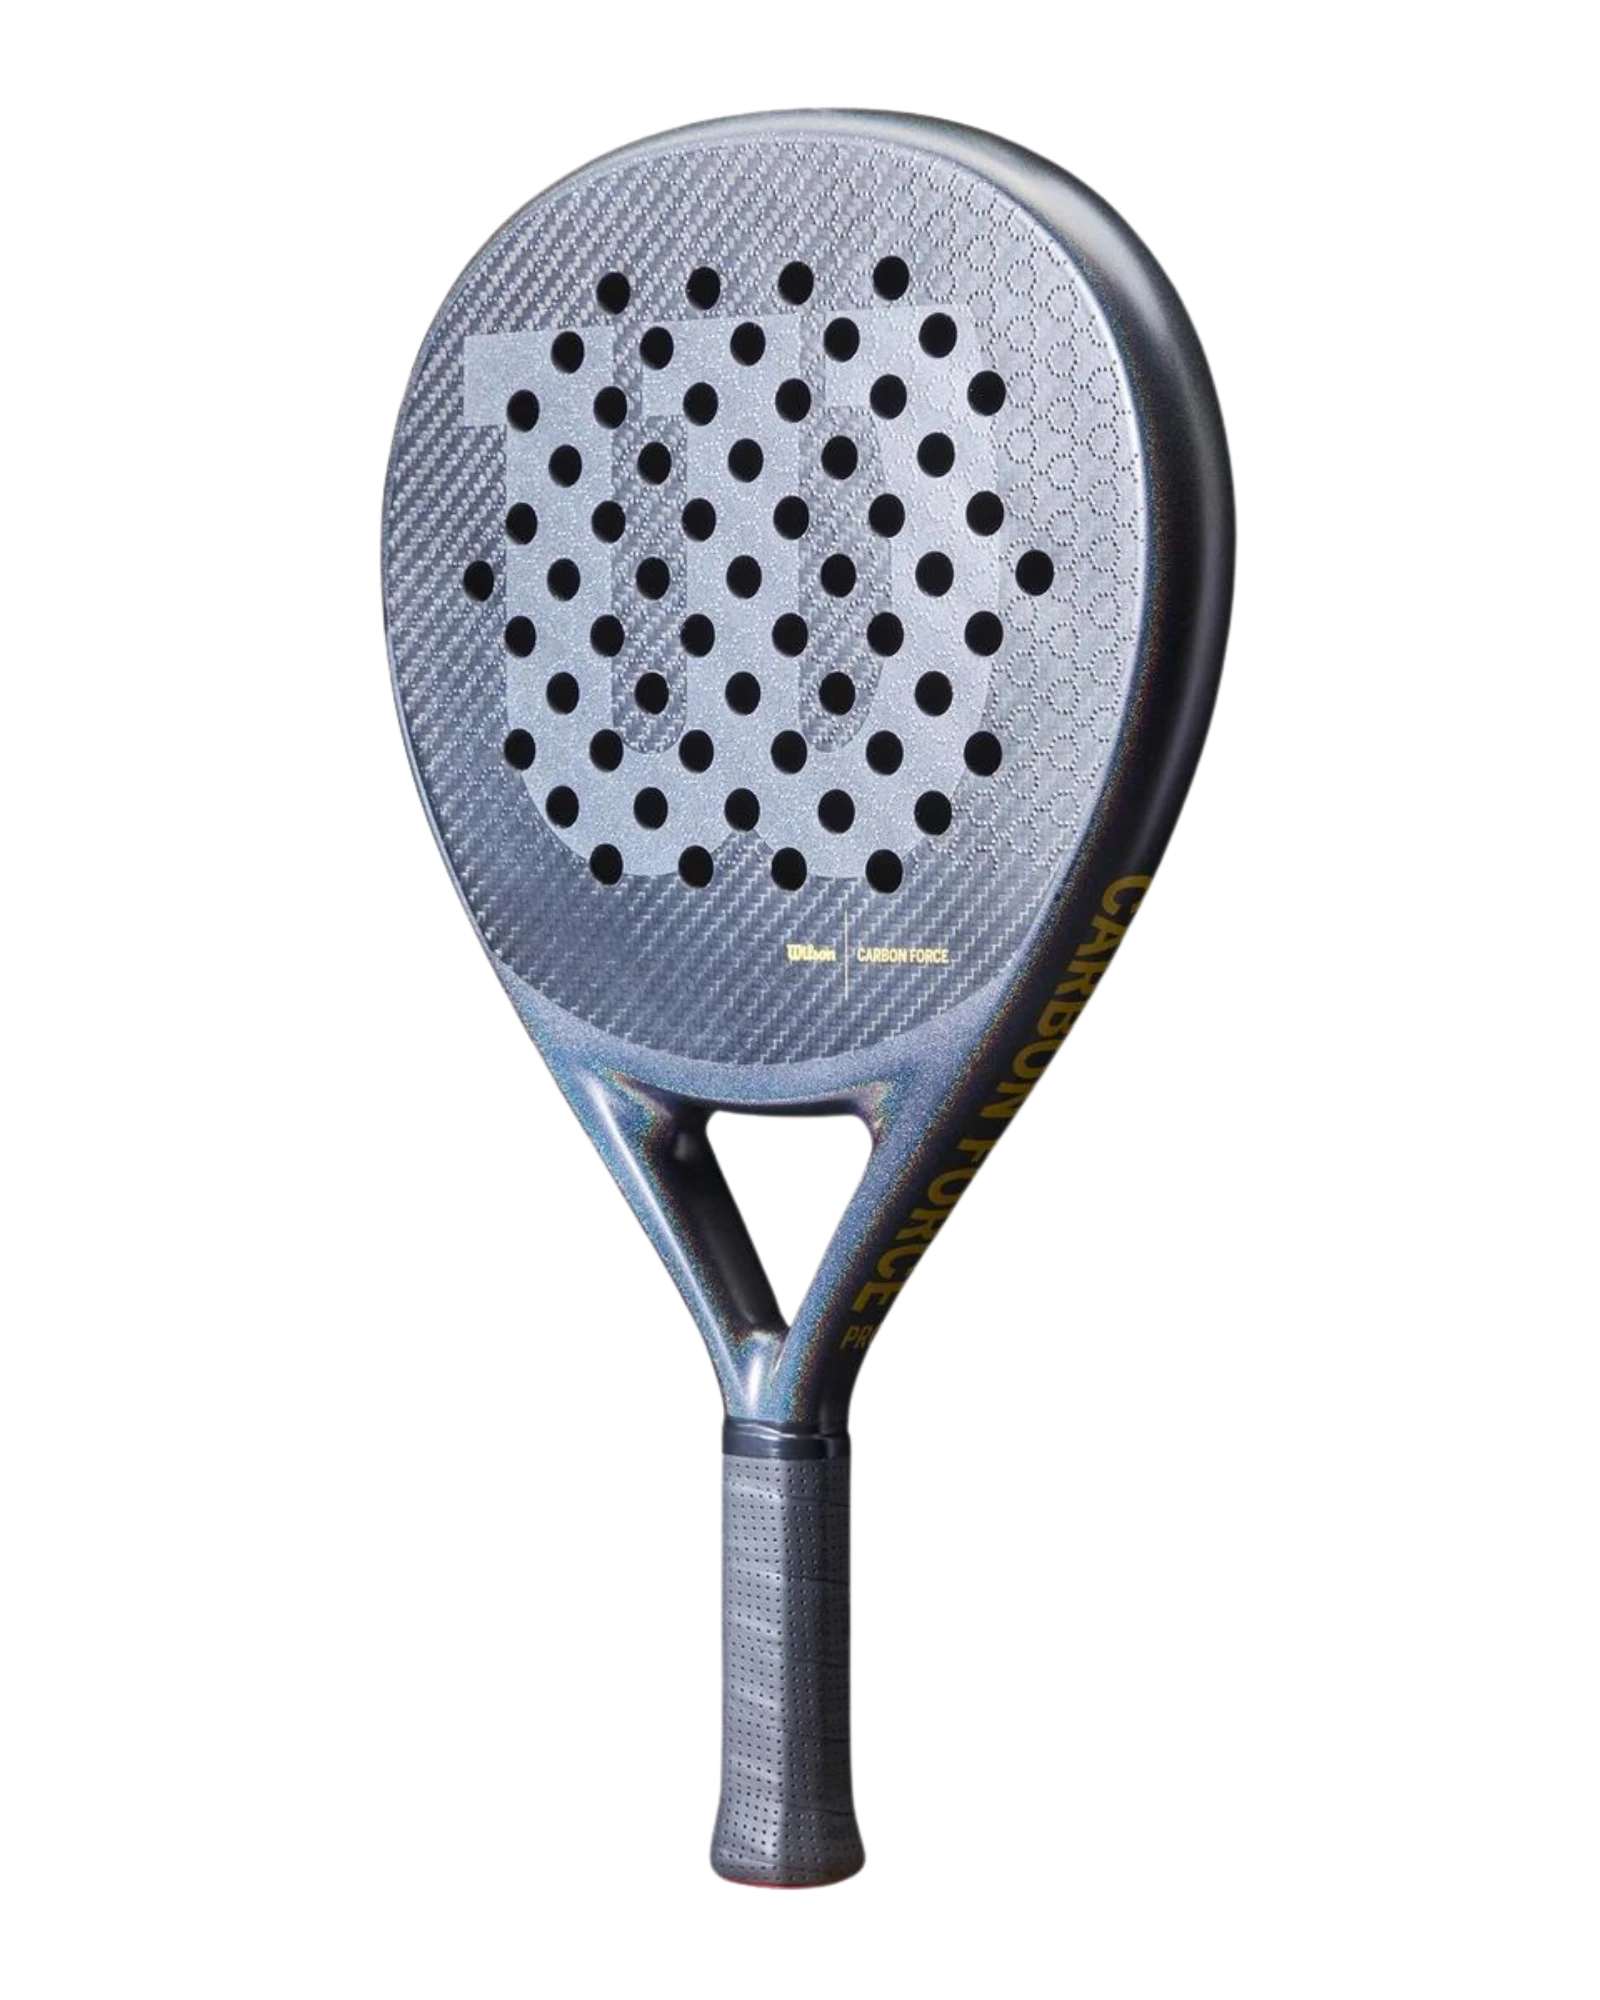 The Wilson Carbon Force Pro 2024 Padel Racket